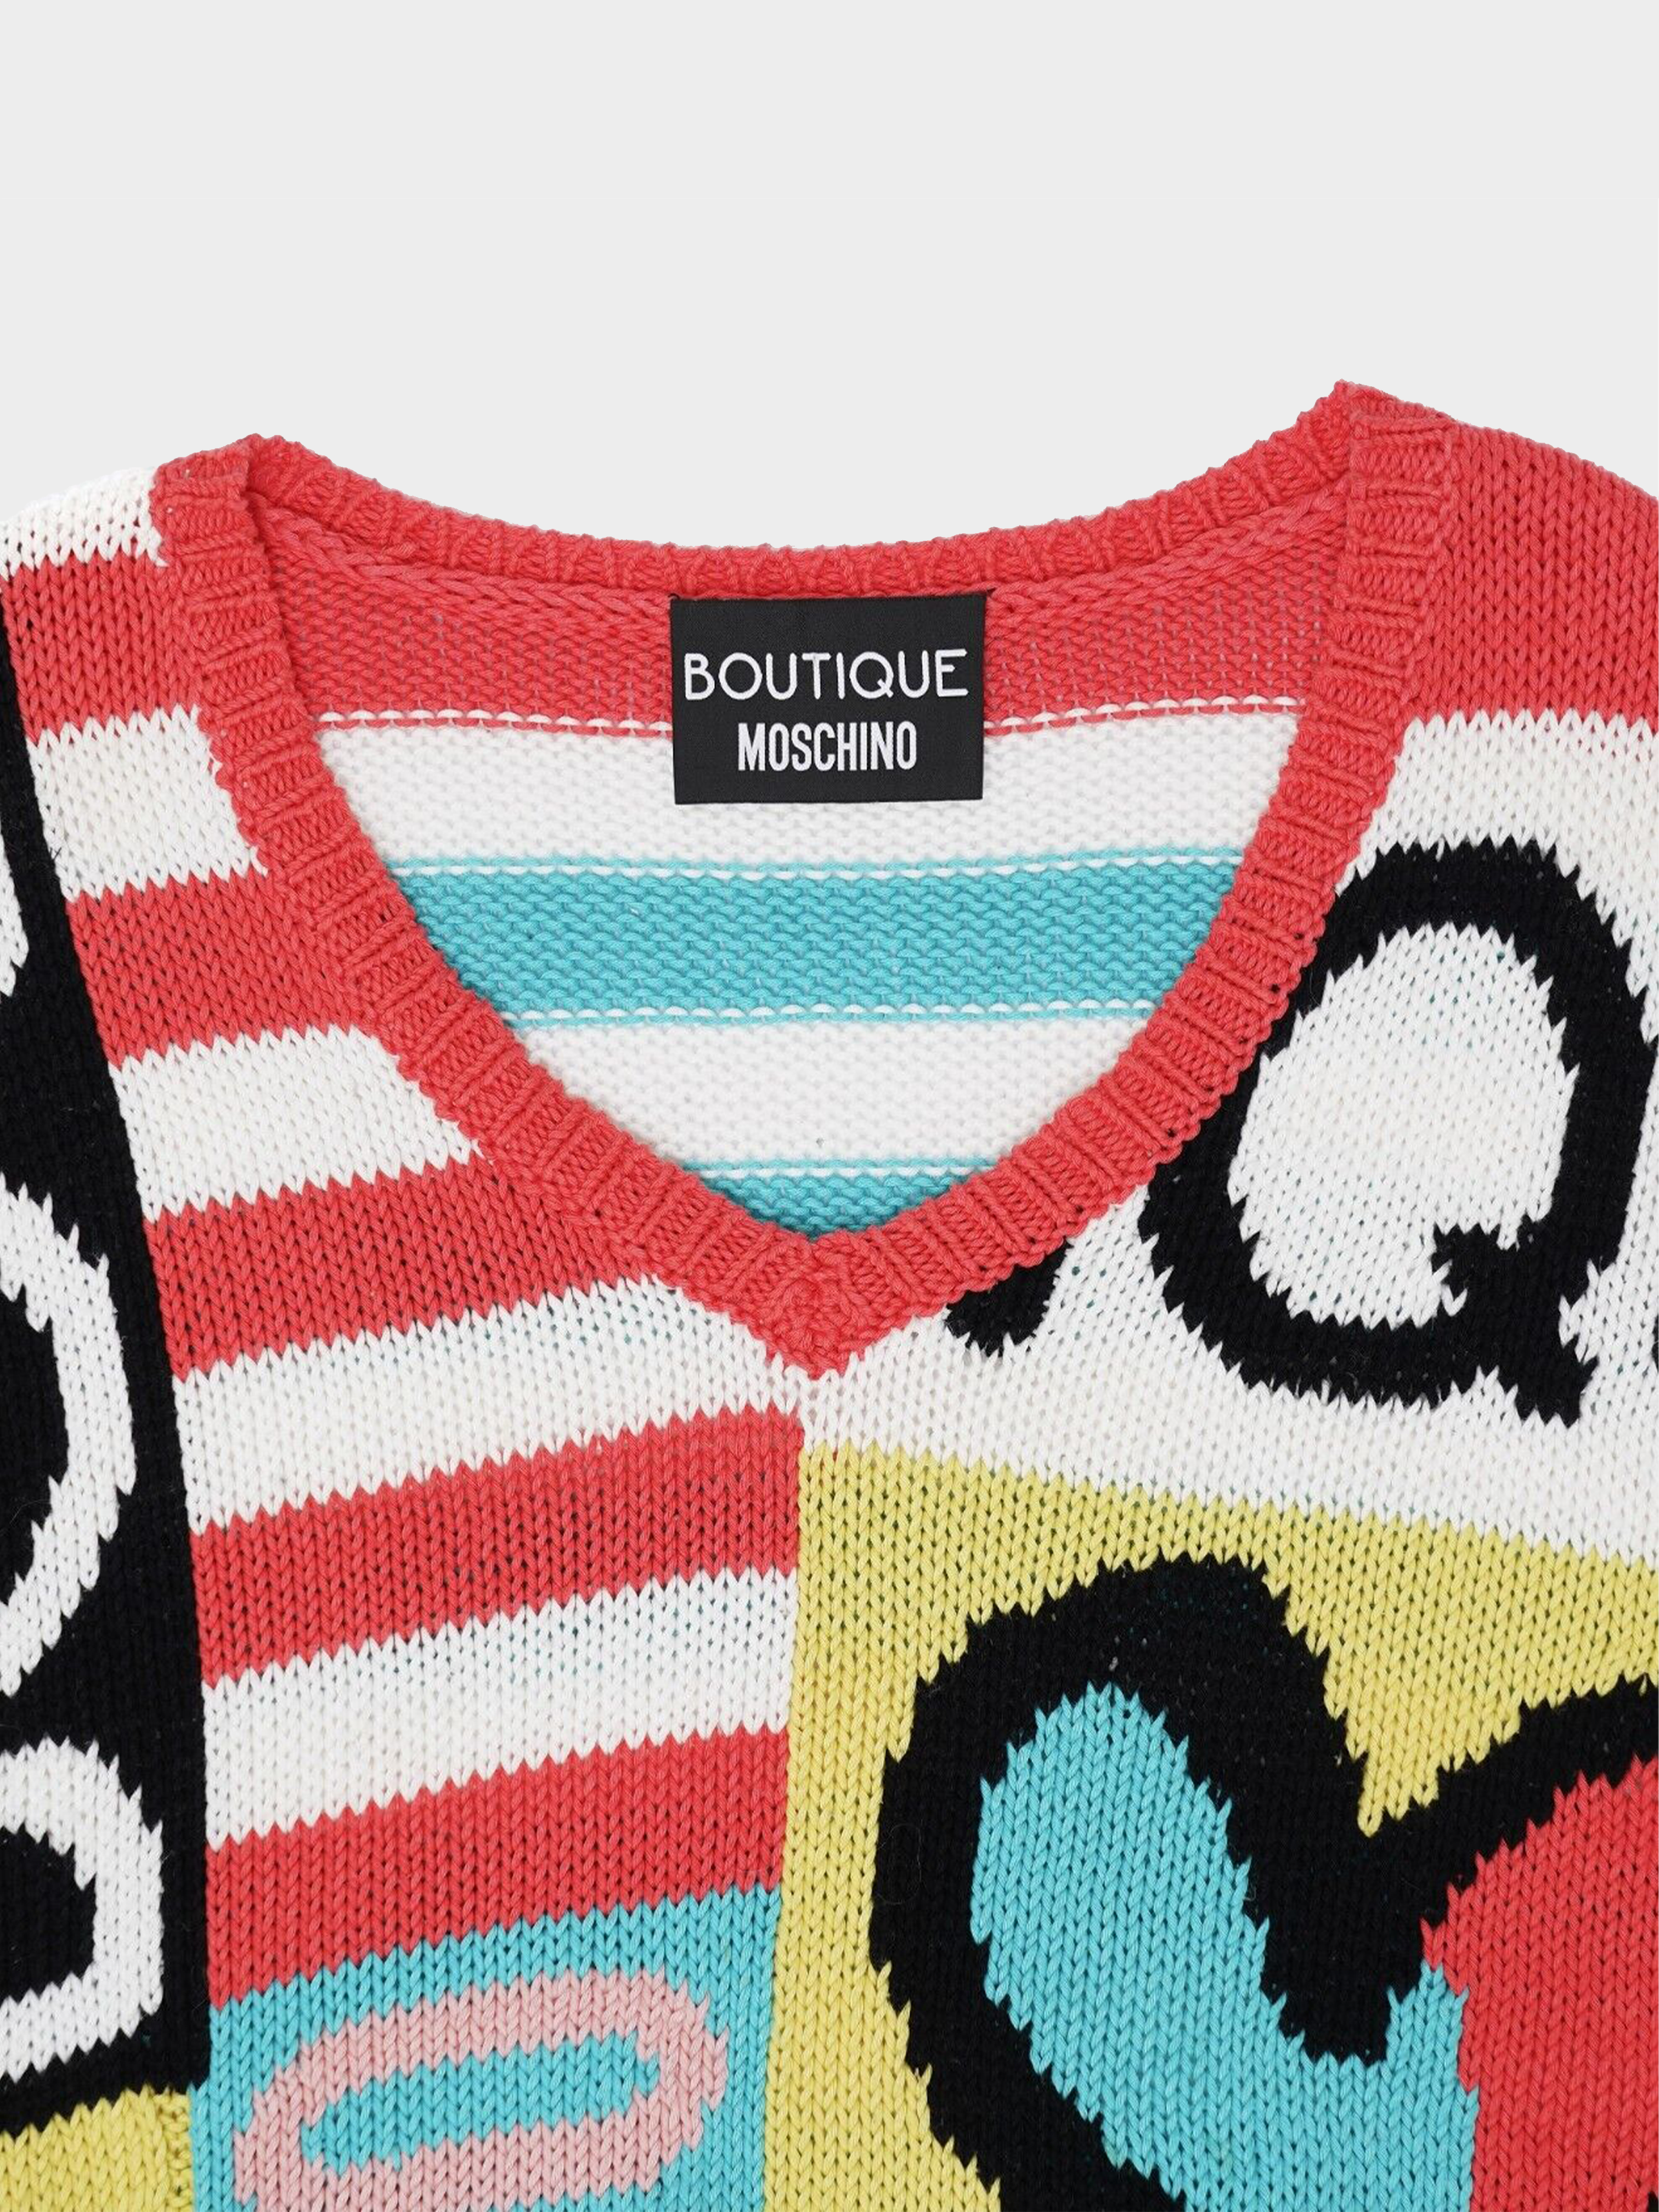 Moschino Boutique 2010s Colorblock Sweater Jumper Knit